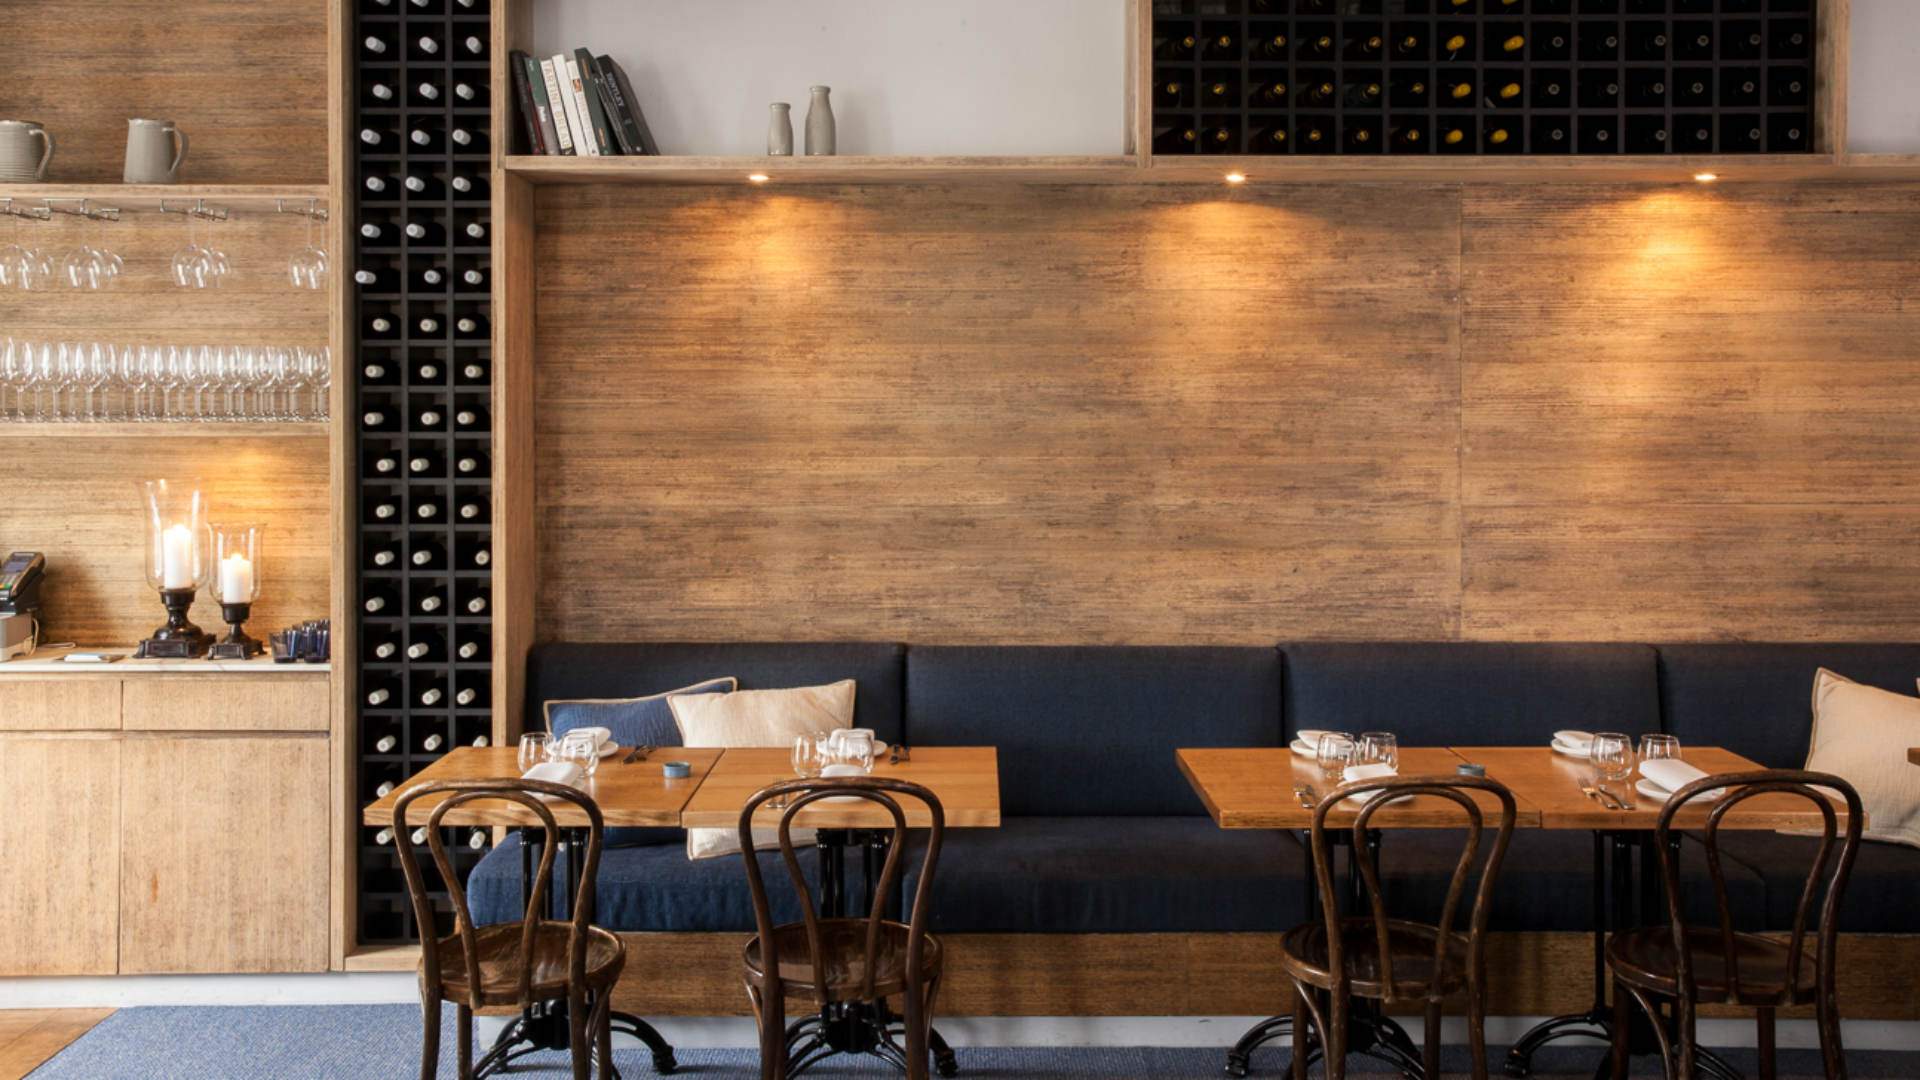 Woollahra Mainstay Buzo Relaunches as Slightly More Casual Bistro